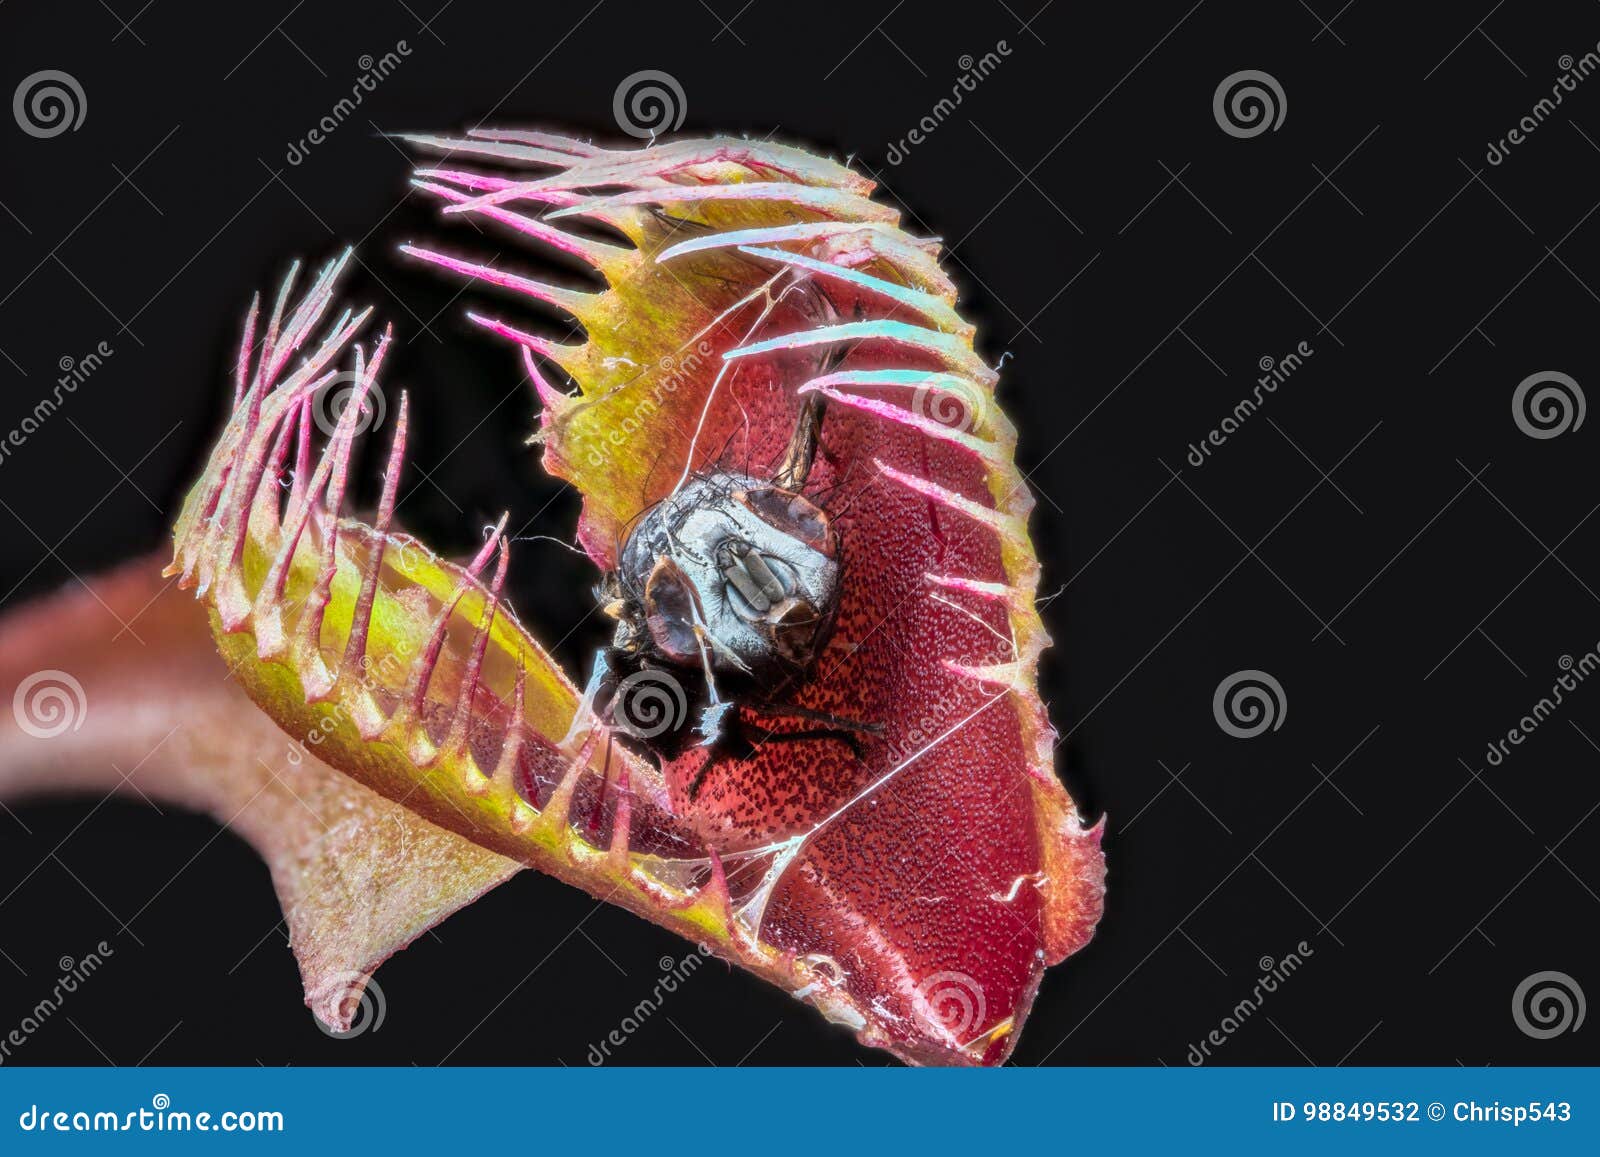 venus fly trap dionaea muscipula with captured digested fly